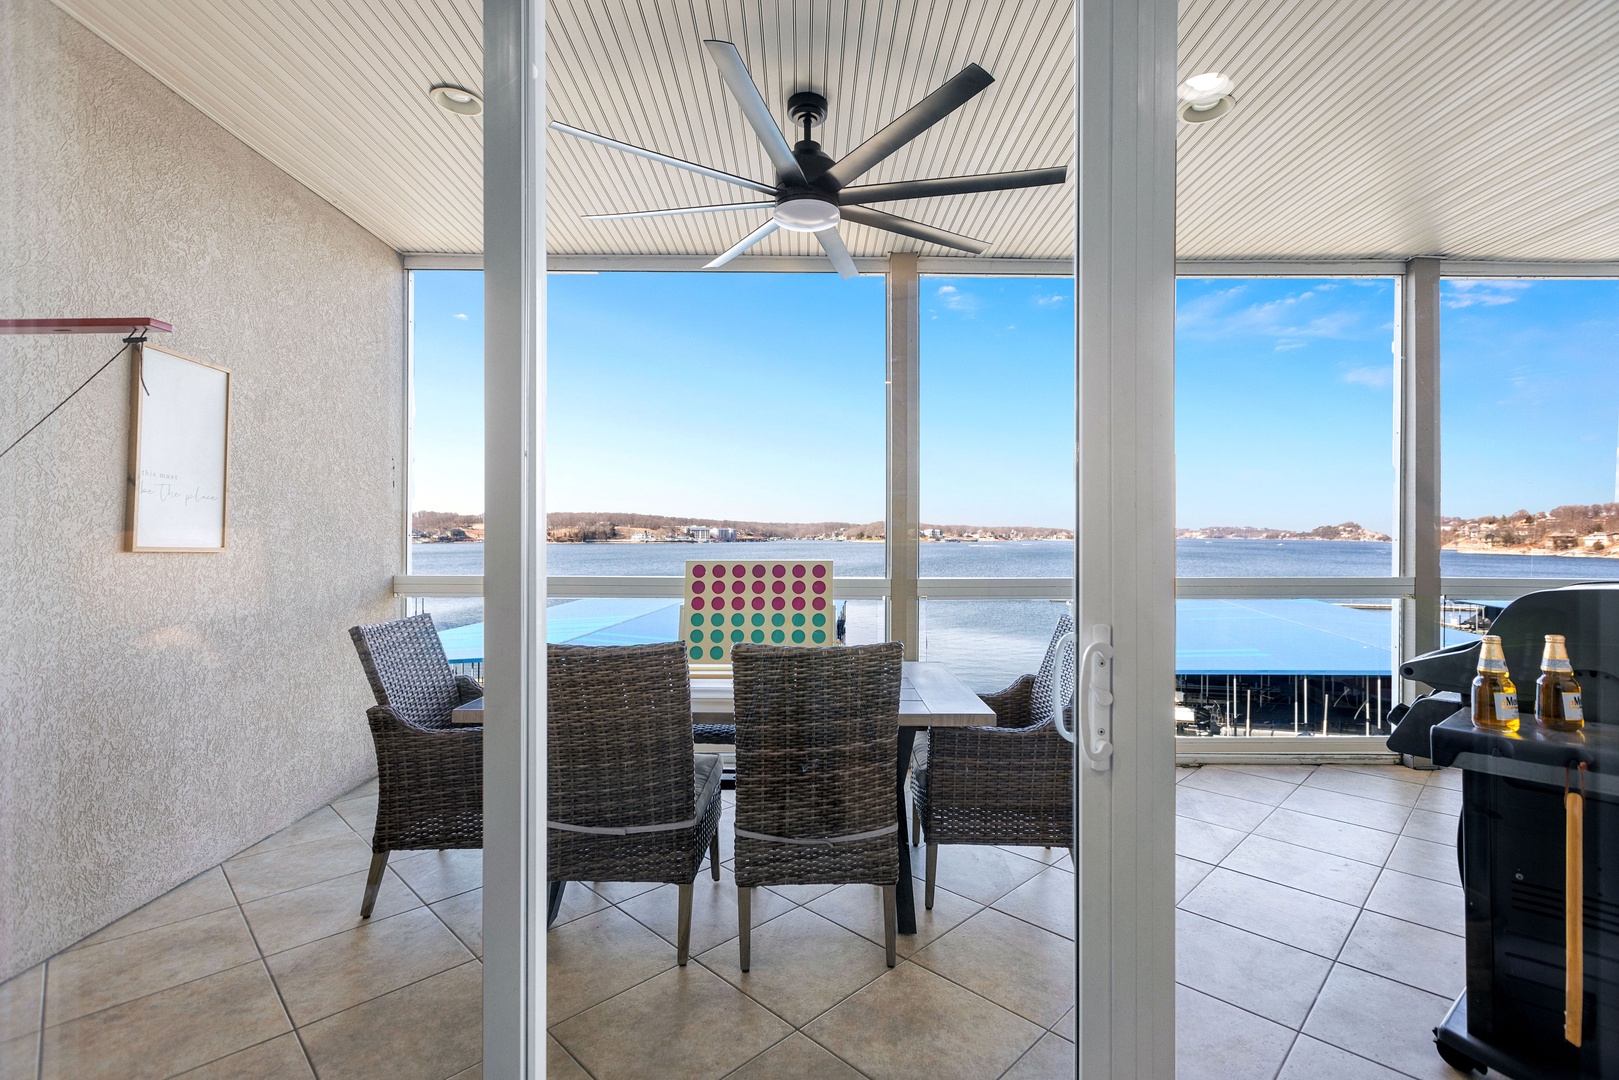 Dine al fresco with stunning lake views on the deck